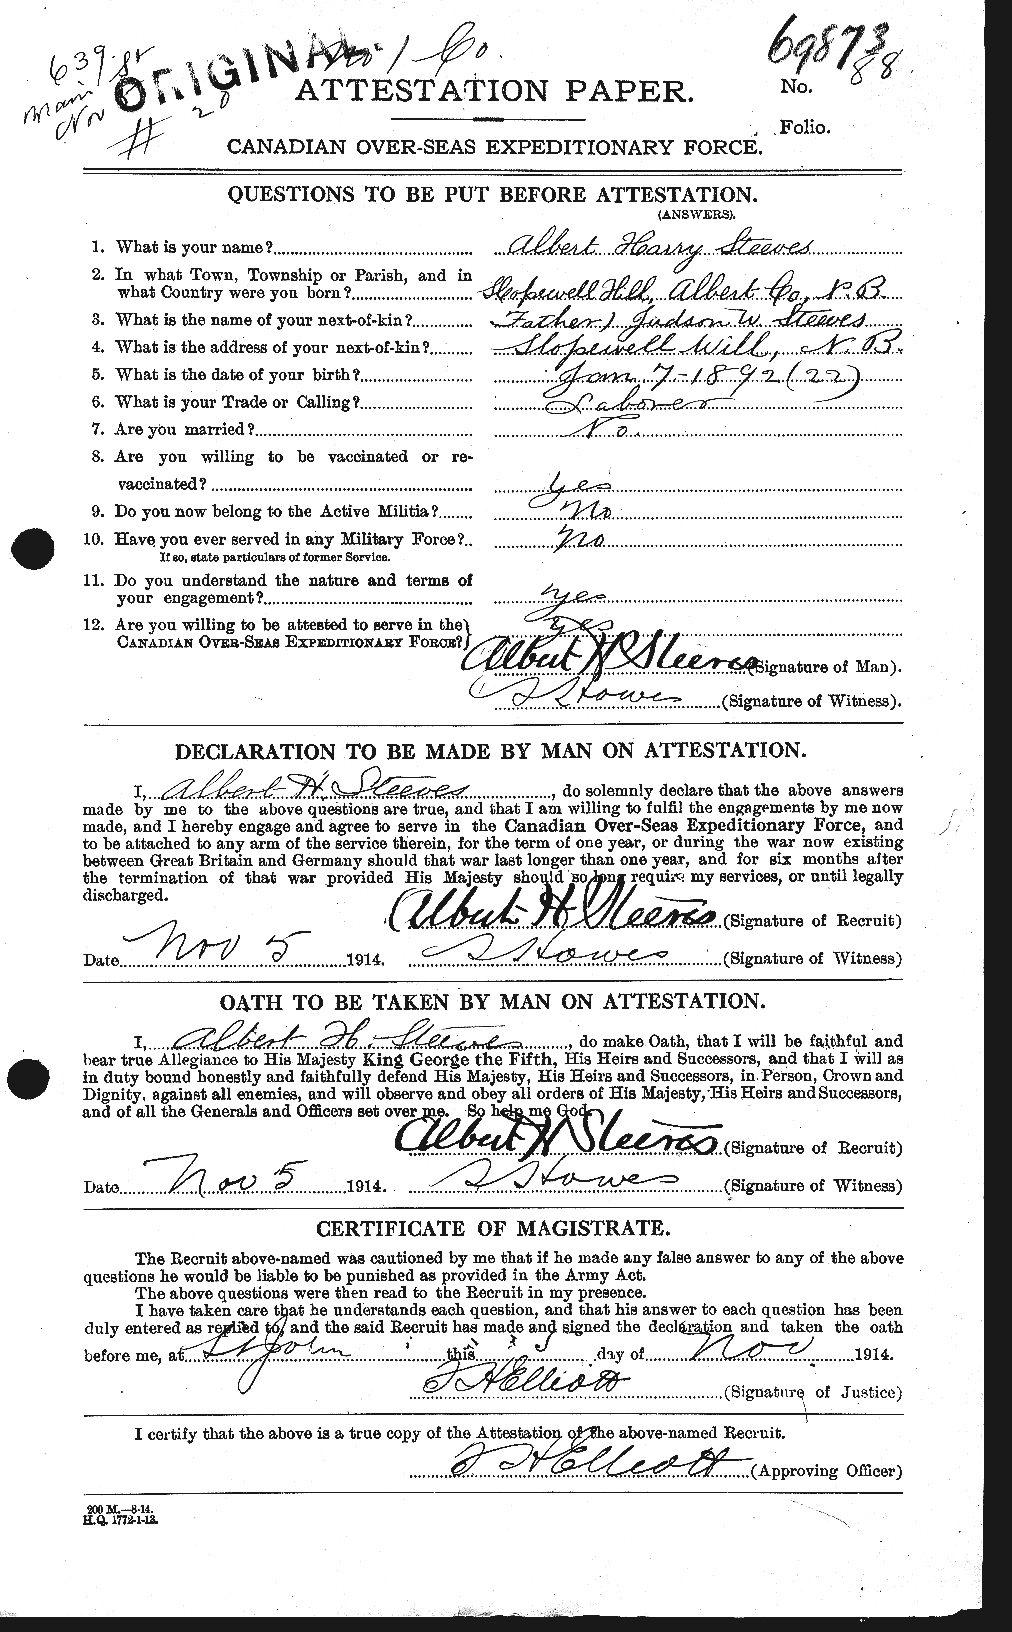 Personnel Records of the First World War - CEF 622946a